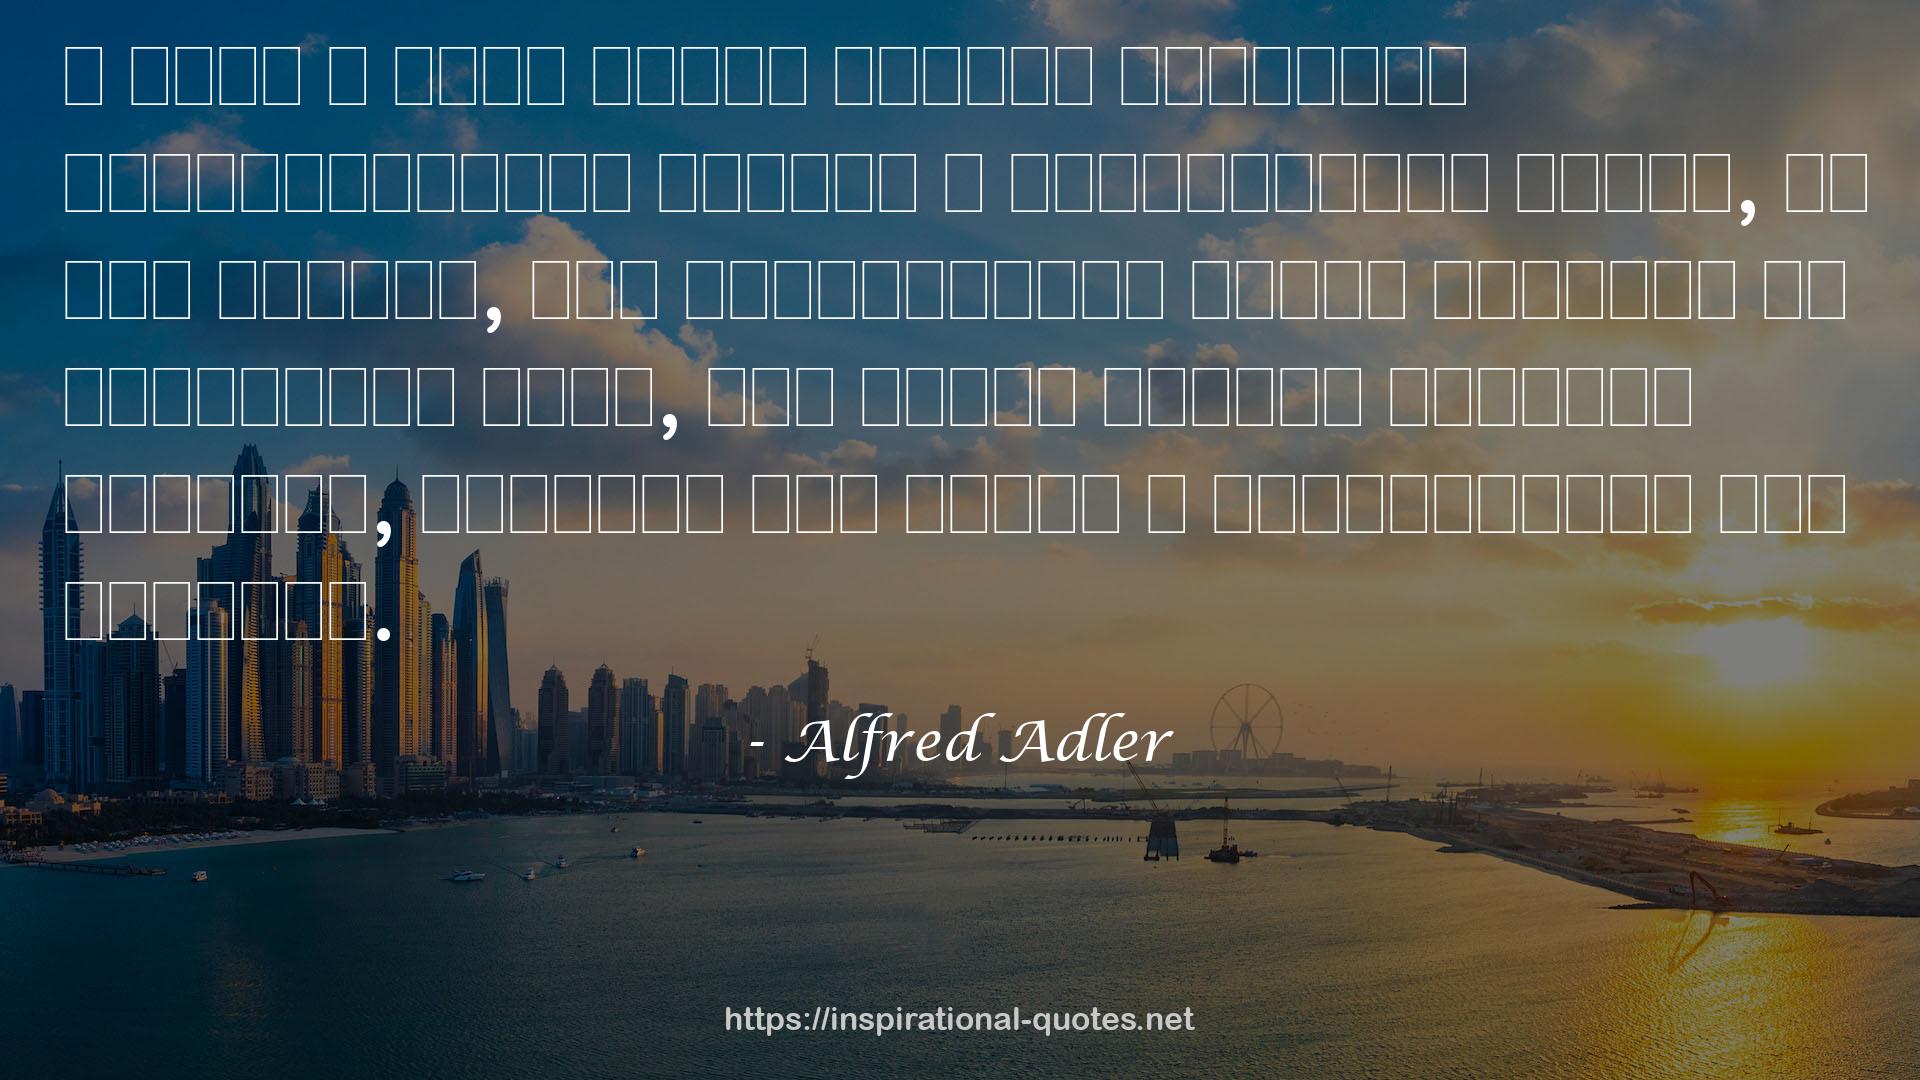 Alfred Adler QUOTES